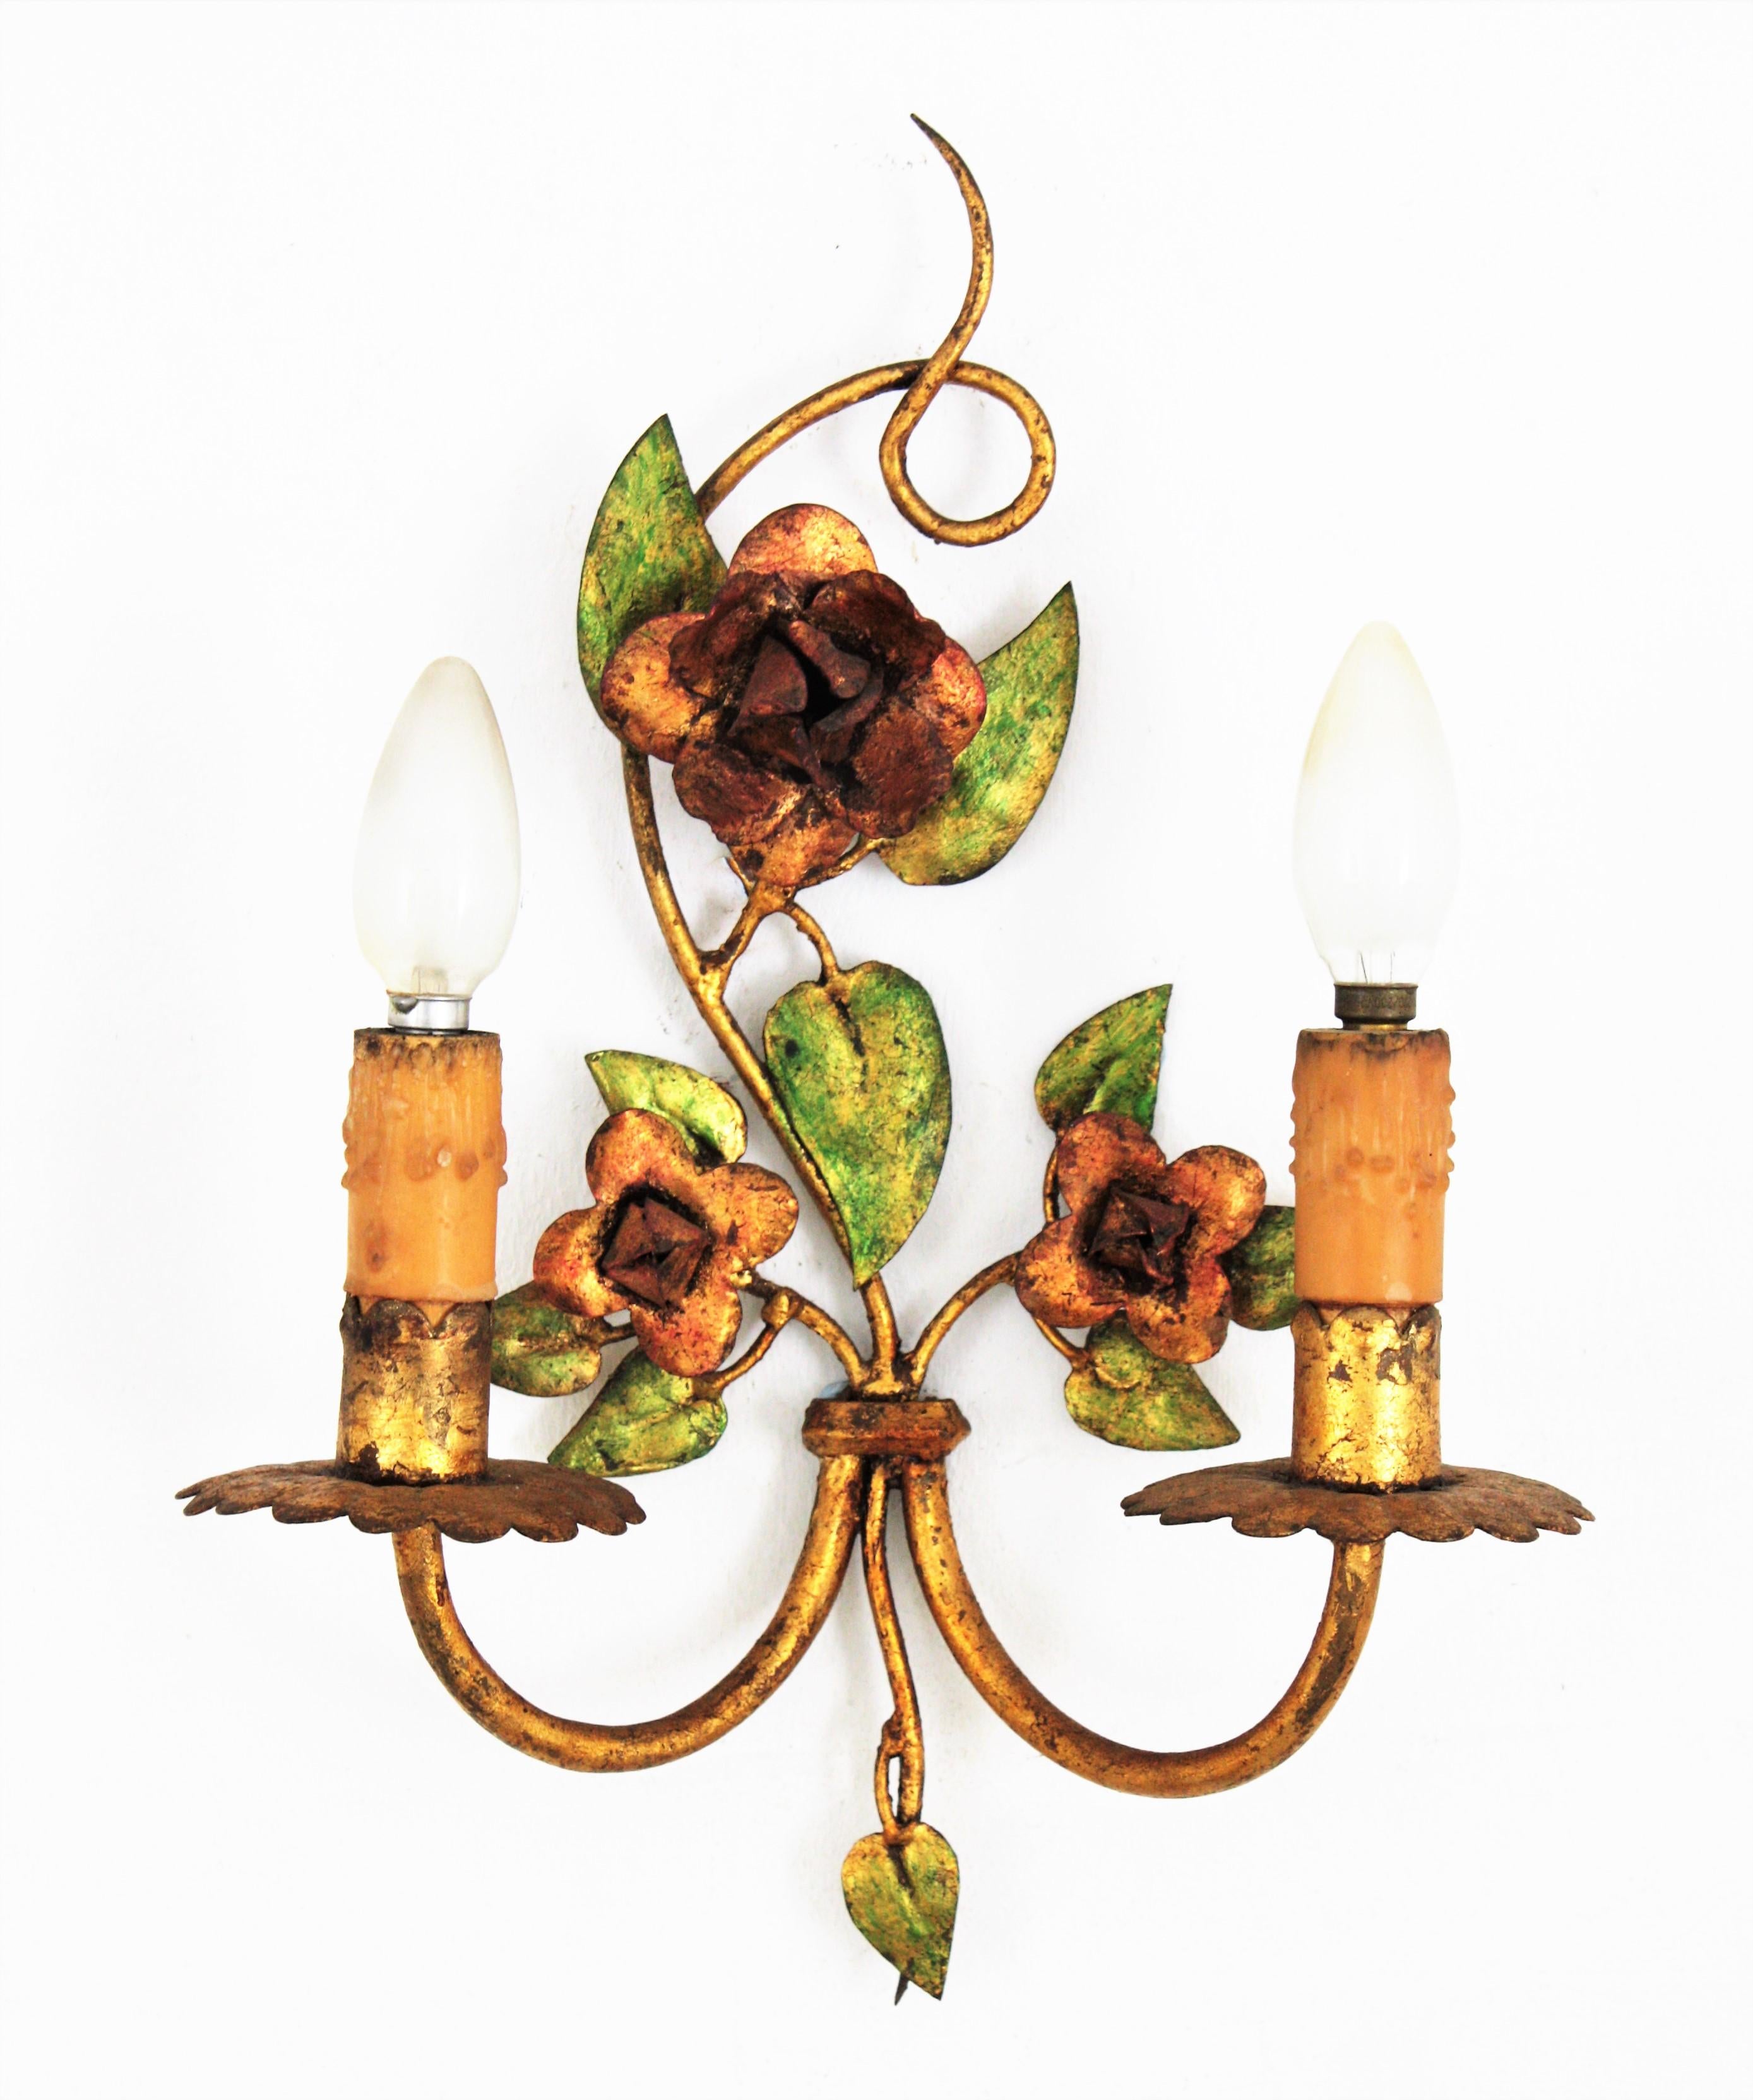 Elegant gilt wrought polychromed iron floral two-light wall sconce with paper shades, France, 1940s.
This wall sconce has two arms decorated by polychrome gold leaf gilt iron roses and leaves.
Each arm has a wax candlelabra holder for an E14